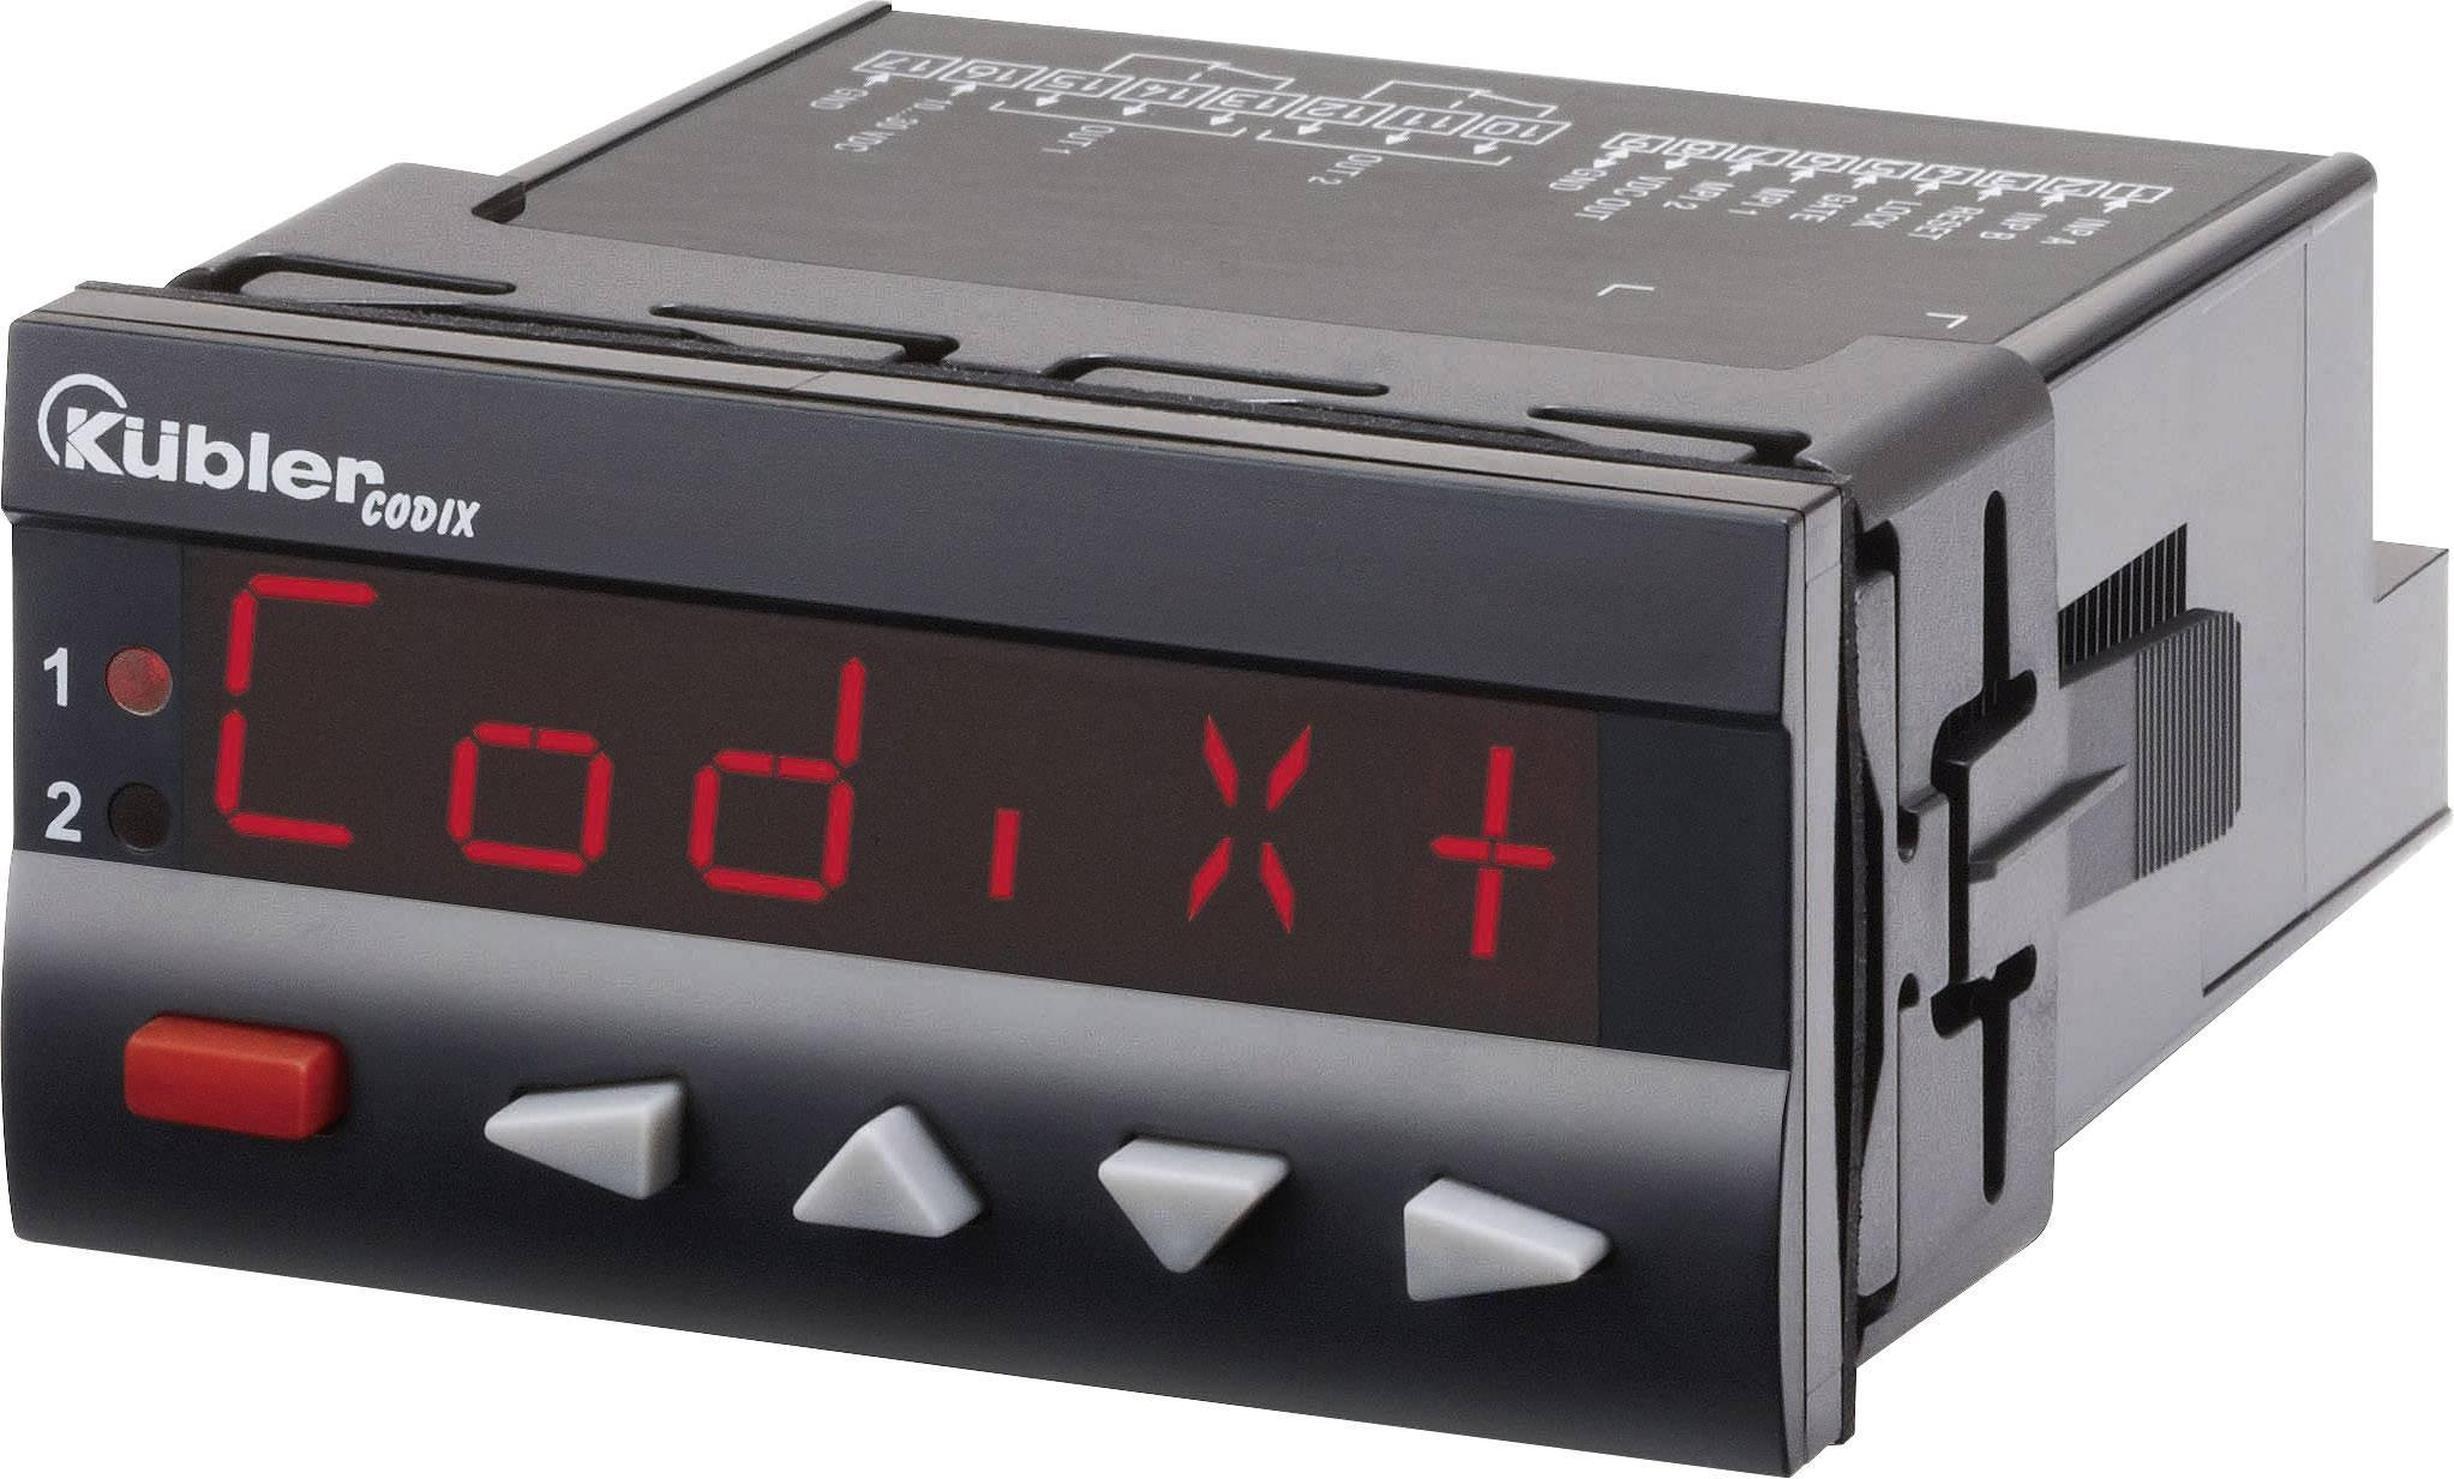 6.564.010.000, CODIX 564 On/Off Temperature Controller, 96 x 48mm, RTD, Thermocouple Input, 90 260 V ac Supply